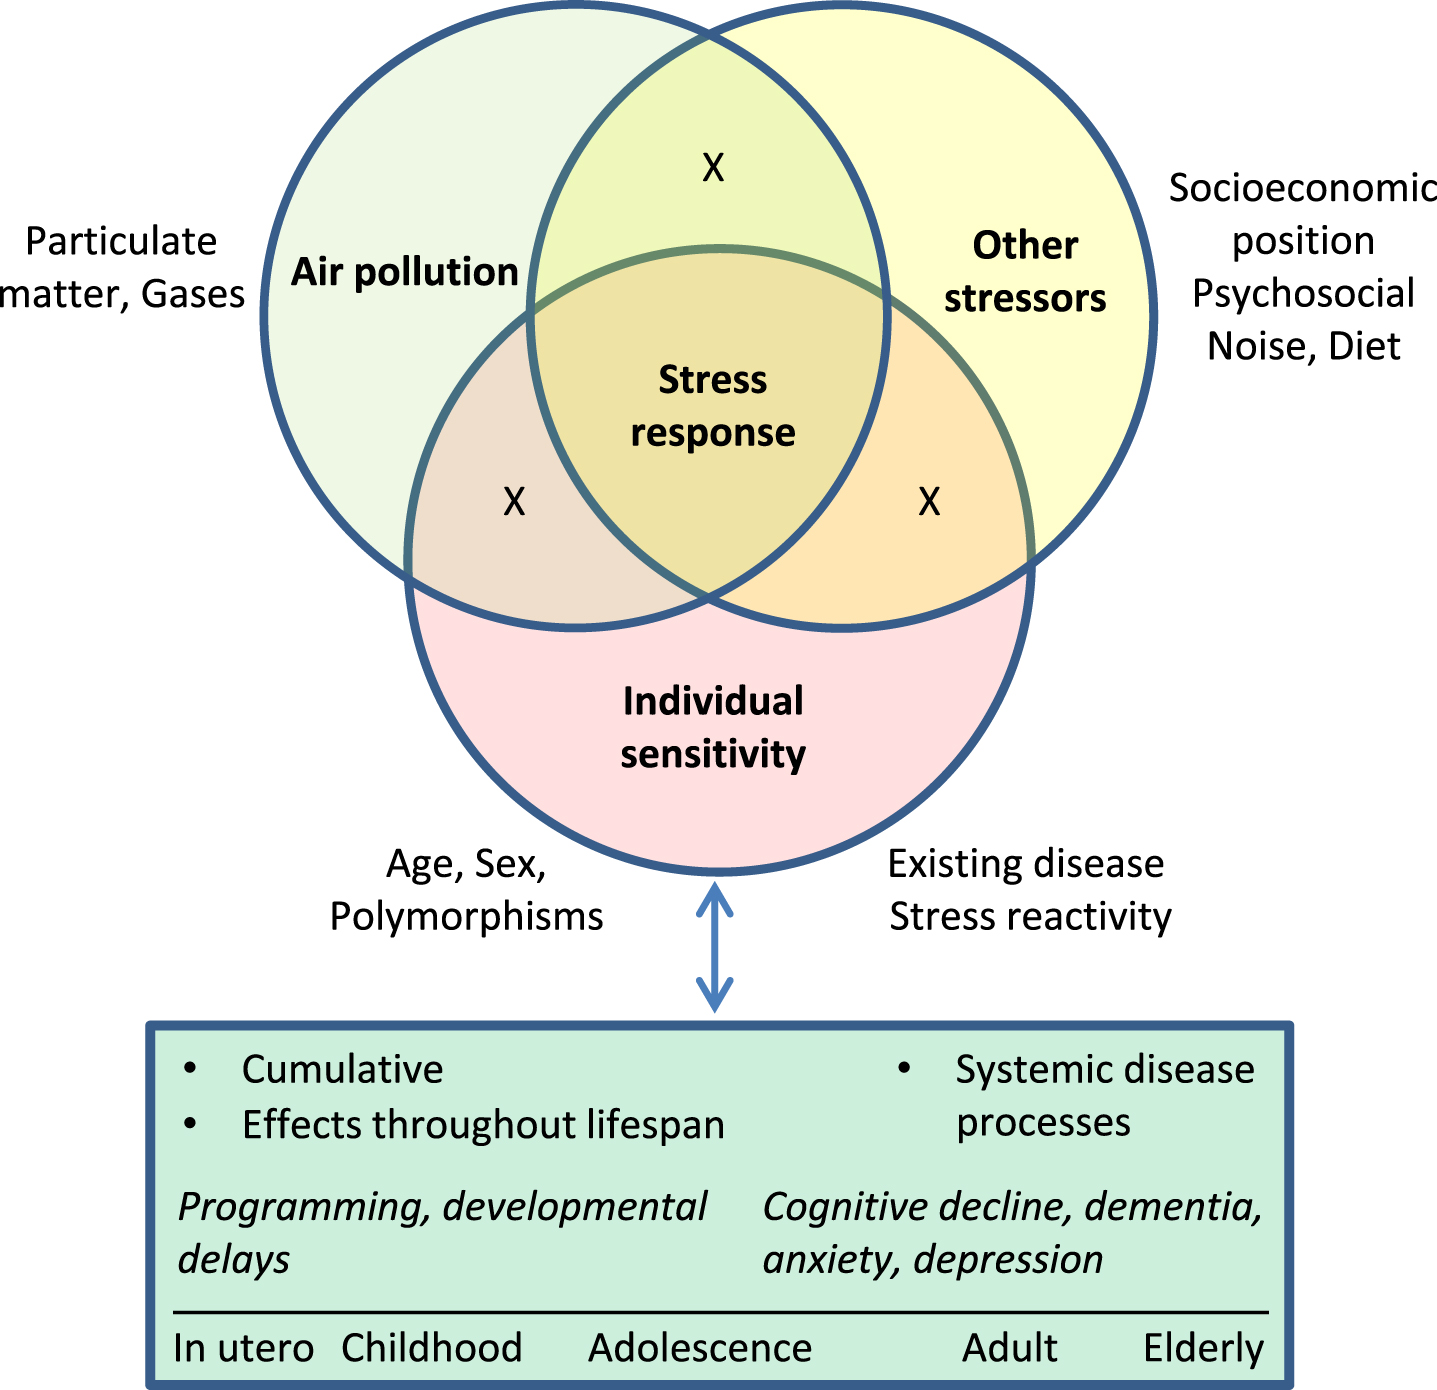 Stress response as an integrator of effects of chemical and non-chemical stressors and individual sensitivity on brain health across the life course. Exposure to air pollution occurs in the context of other exposures, including stressors associated with socioeconomic position such crowding, crime, noise, and other hazards. Deleterious effects of exposure to chronic stressors may accumulate across the life course, and in turn may further increase vulnerability to subsequent exposures. Effects include impacts on fetal development, programming of future stress reactivity and disease susceptibility, and cumulative dysregulation of systemic neuroendocrine, cardiovascular, inflammatory, and metabolic processes that collectively contribute to disease. “X” represents interactions among factors.